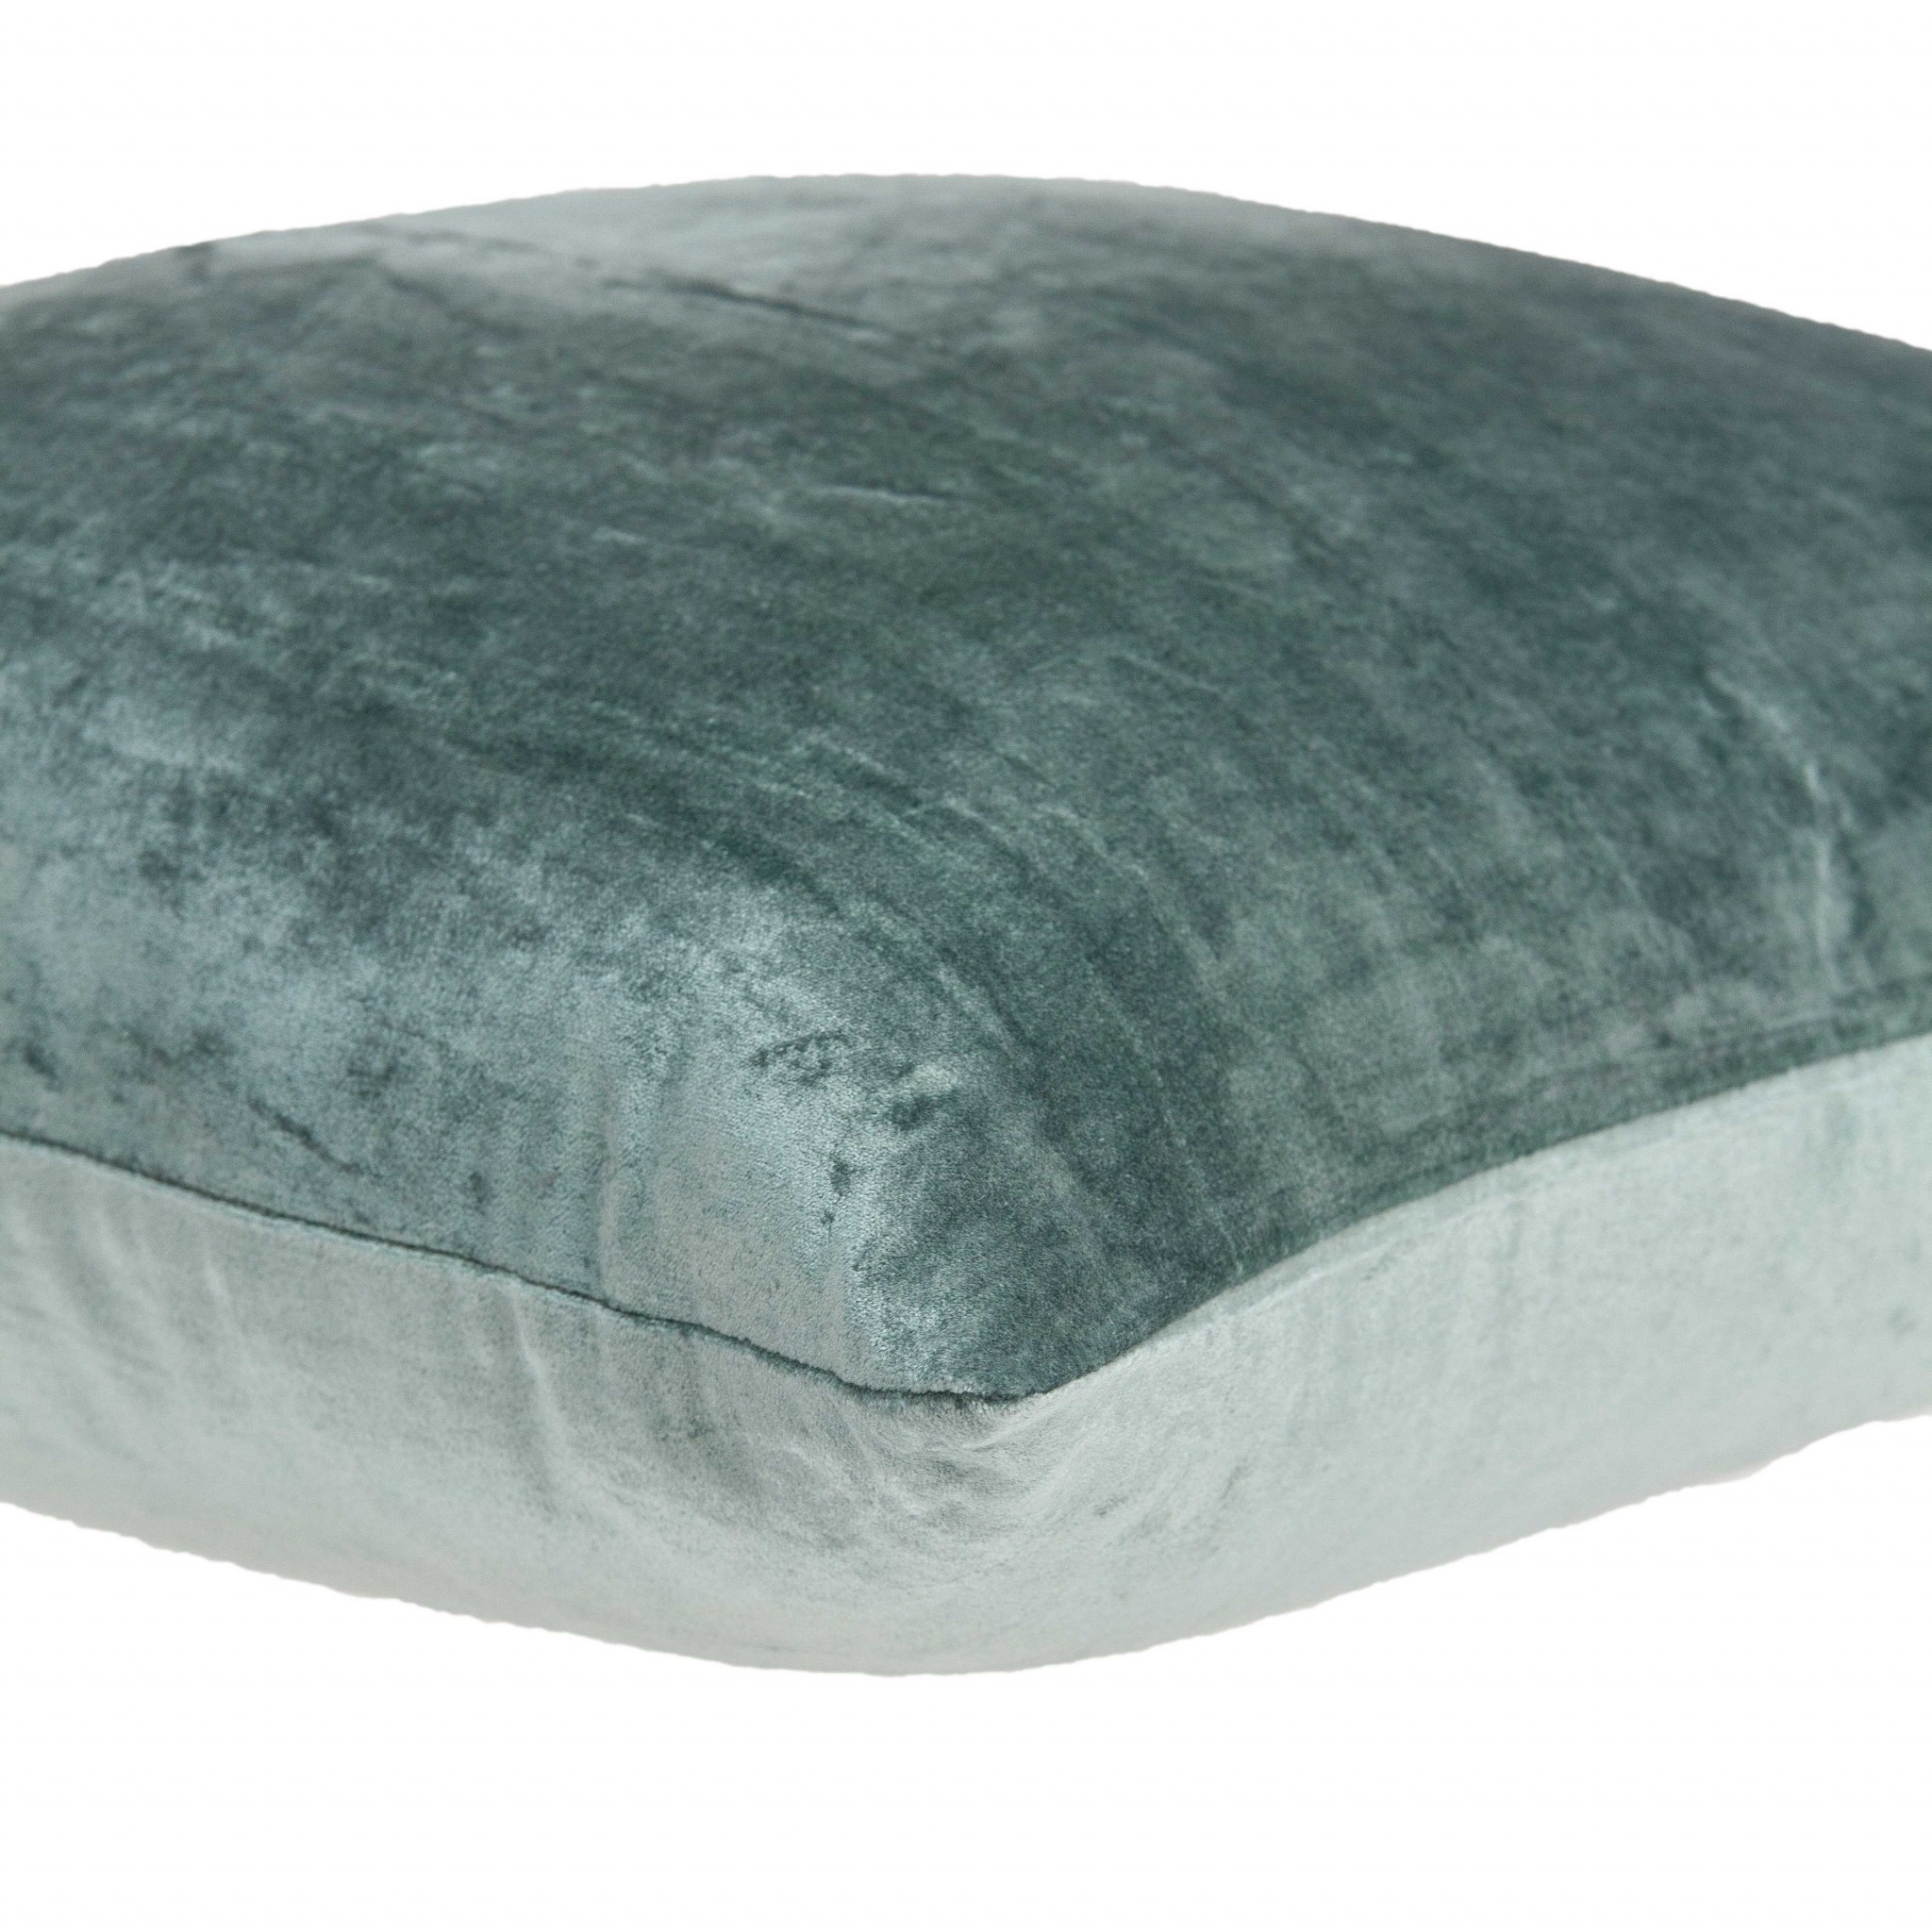 20" x 0.5" x 20" Transitional Sea Foam Solid Pillow Cover